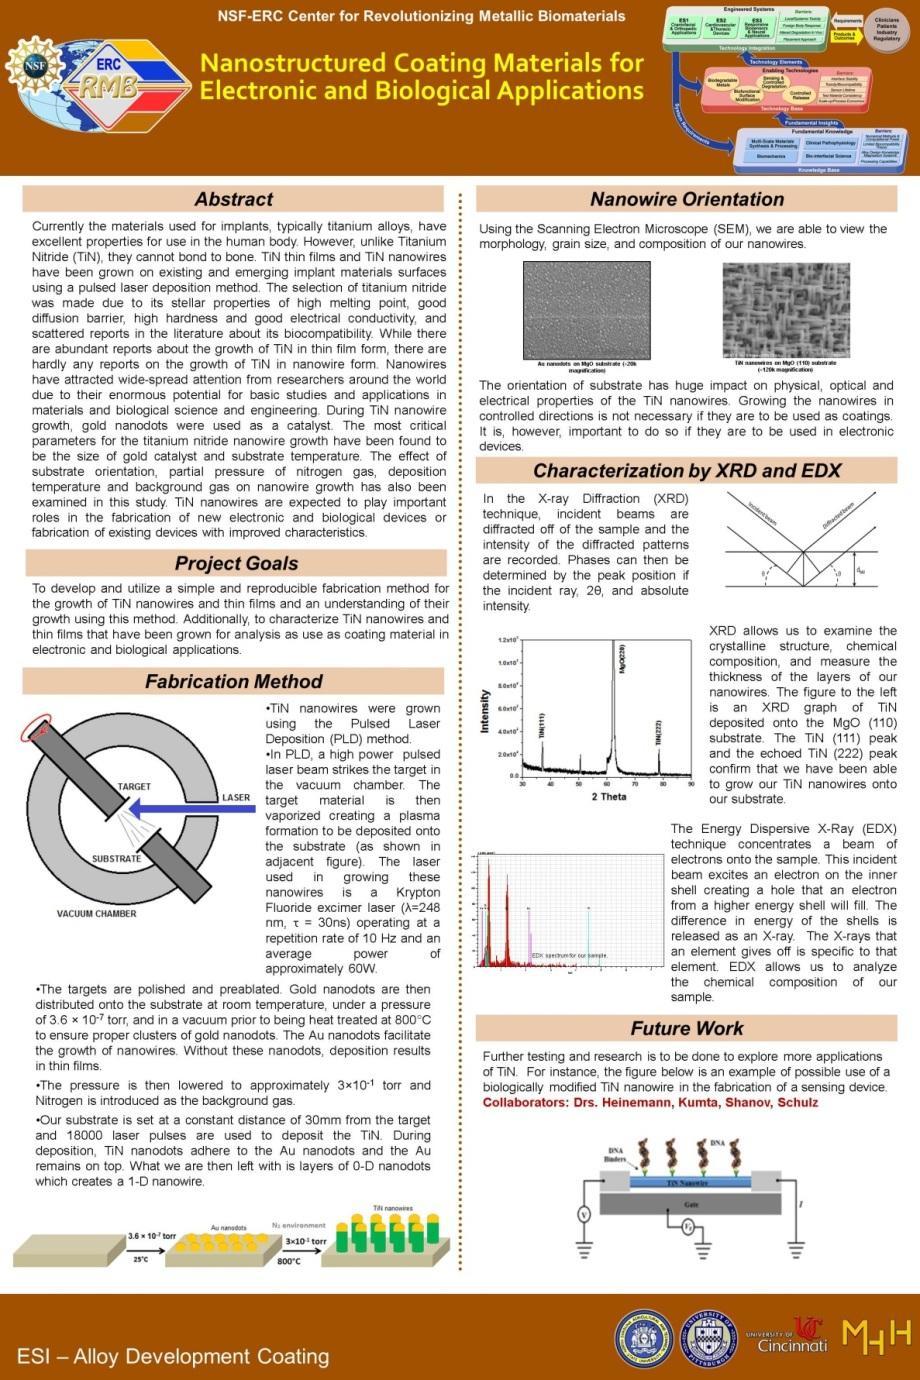 Fig. 5. A poster developed by an NUE supported undergradute student working on a nanoproject. The poster won the scond prize during the 2011 ERC-REU poster competition E.